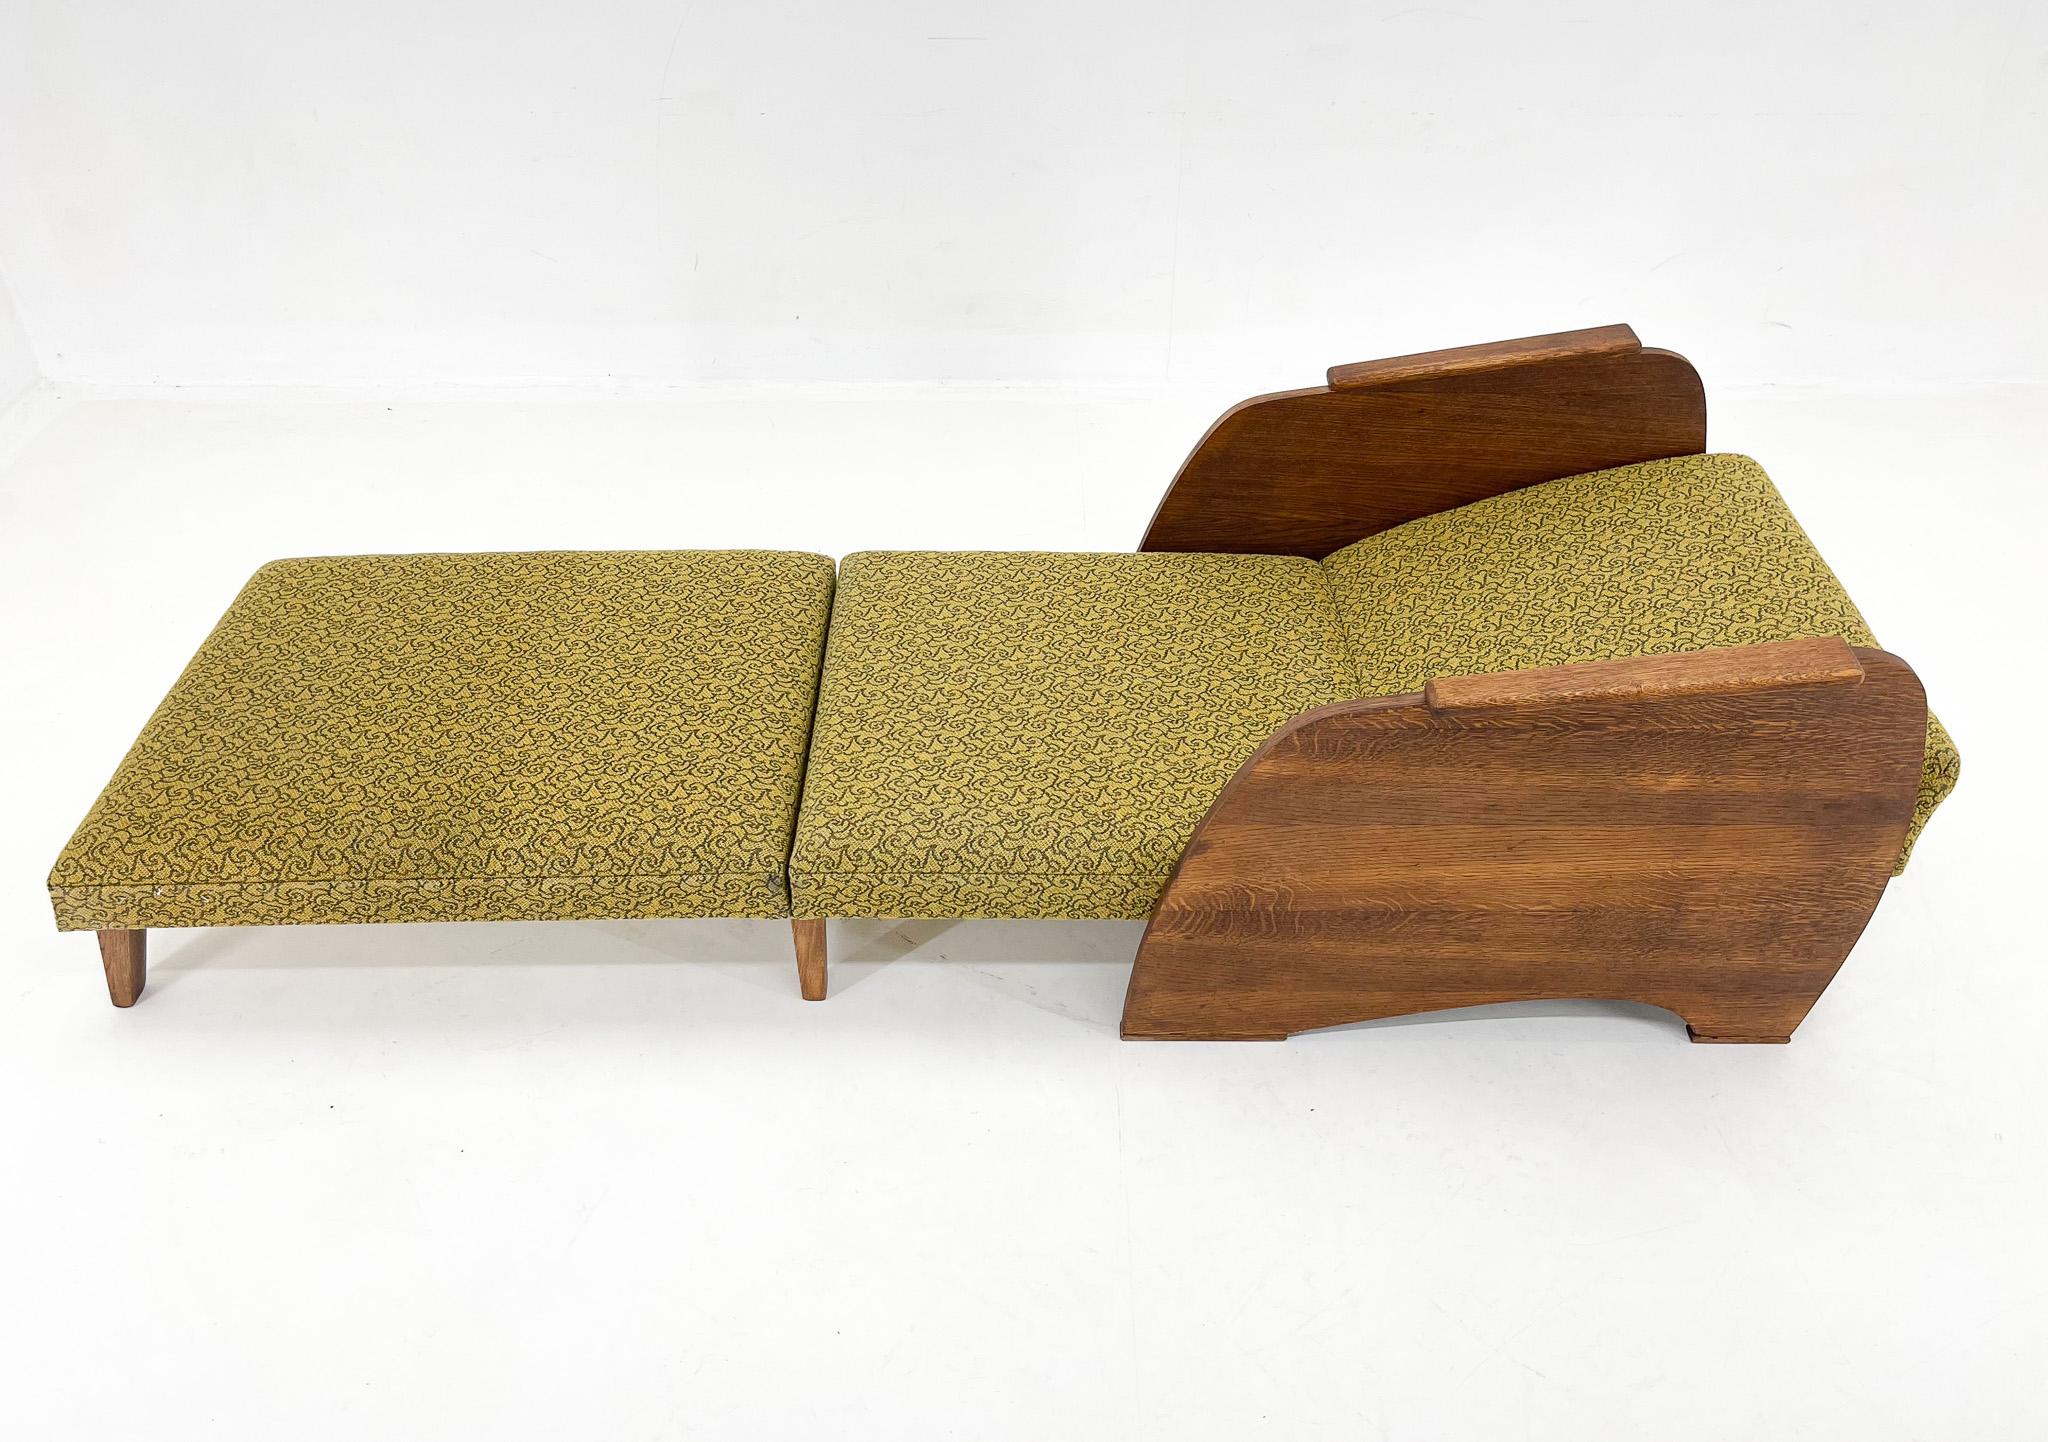 1960s Armchair Convertible to Daybed, Czechoslovakia / 2 Pieces Available For Sale 1